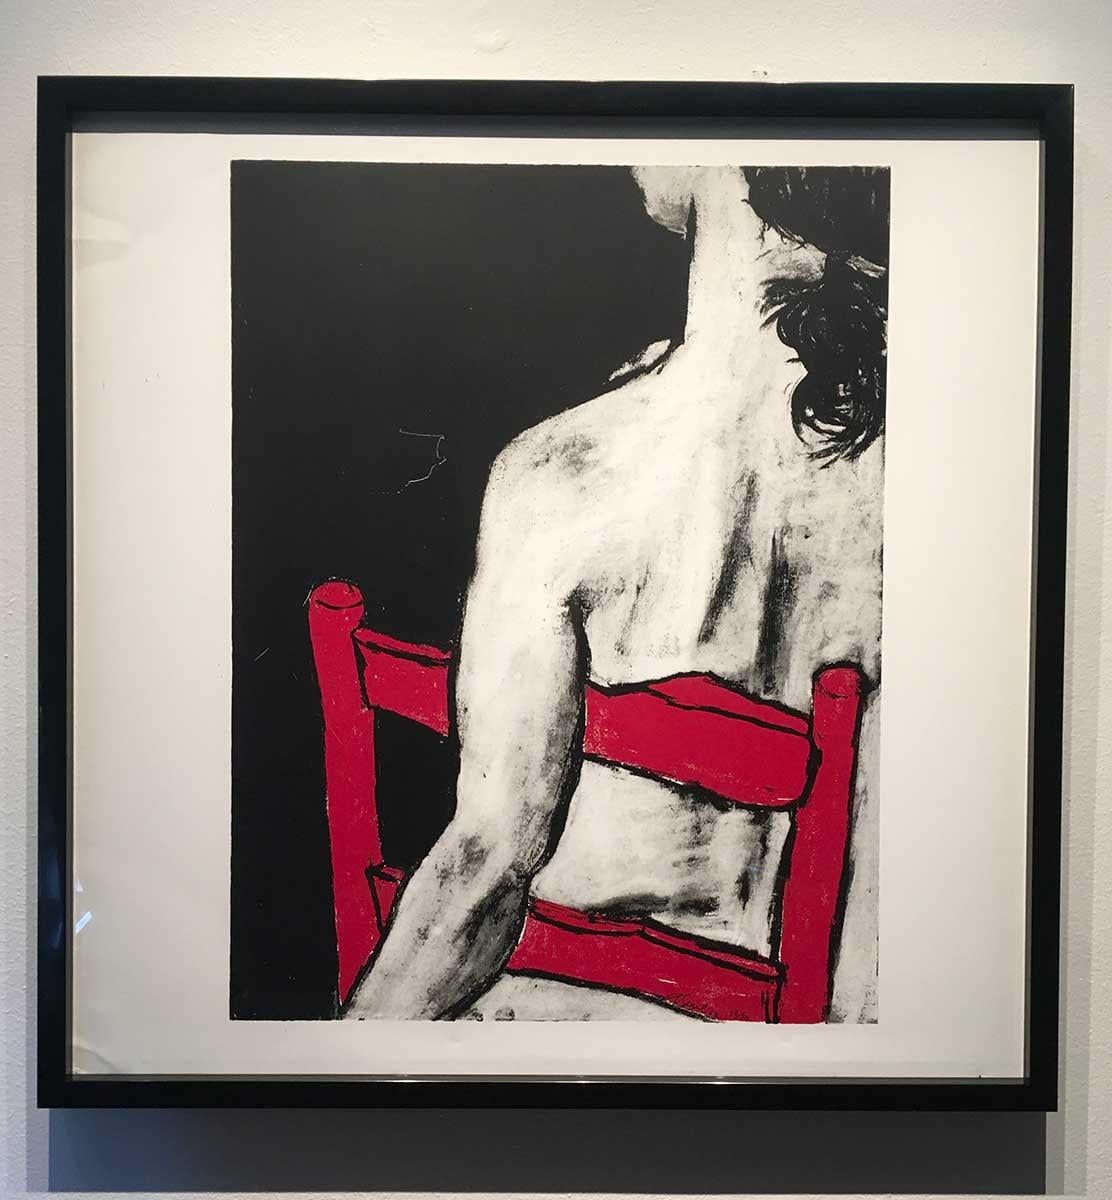 'Girl Seated on Red Chair', by George Regal, Screen Print on Metal